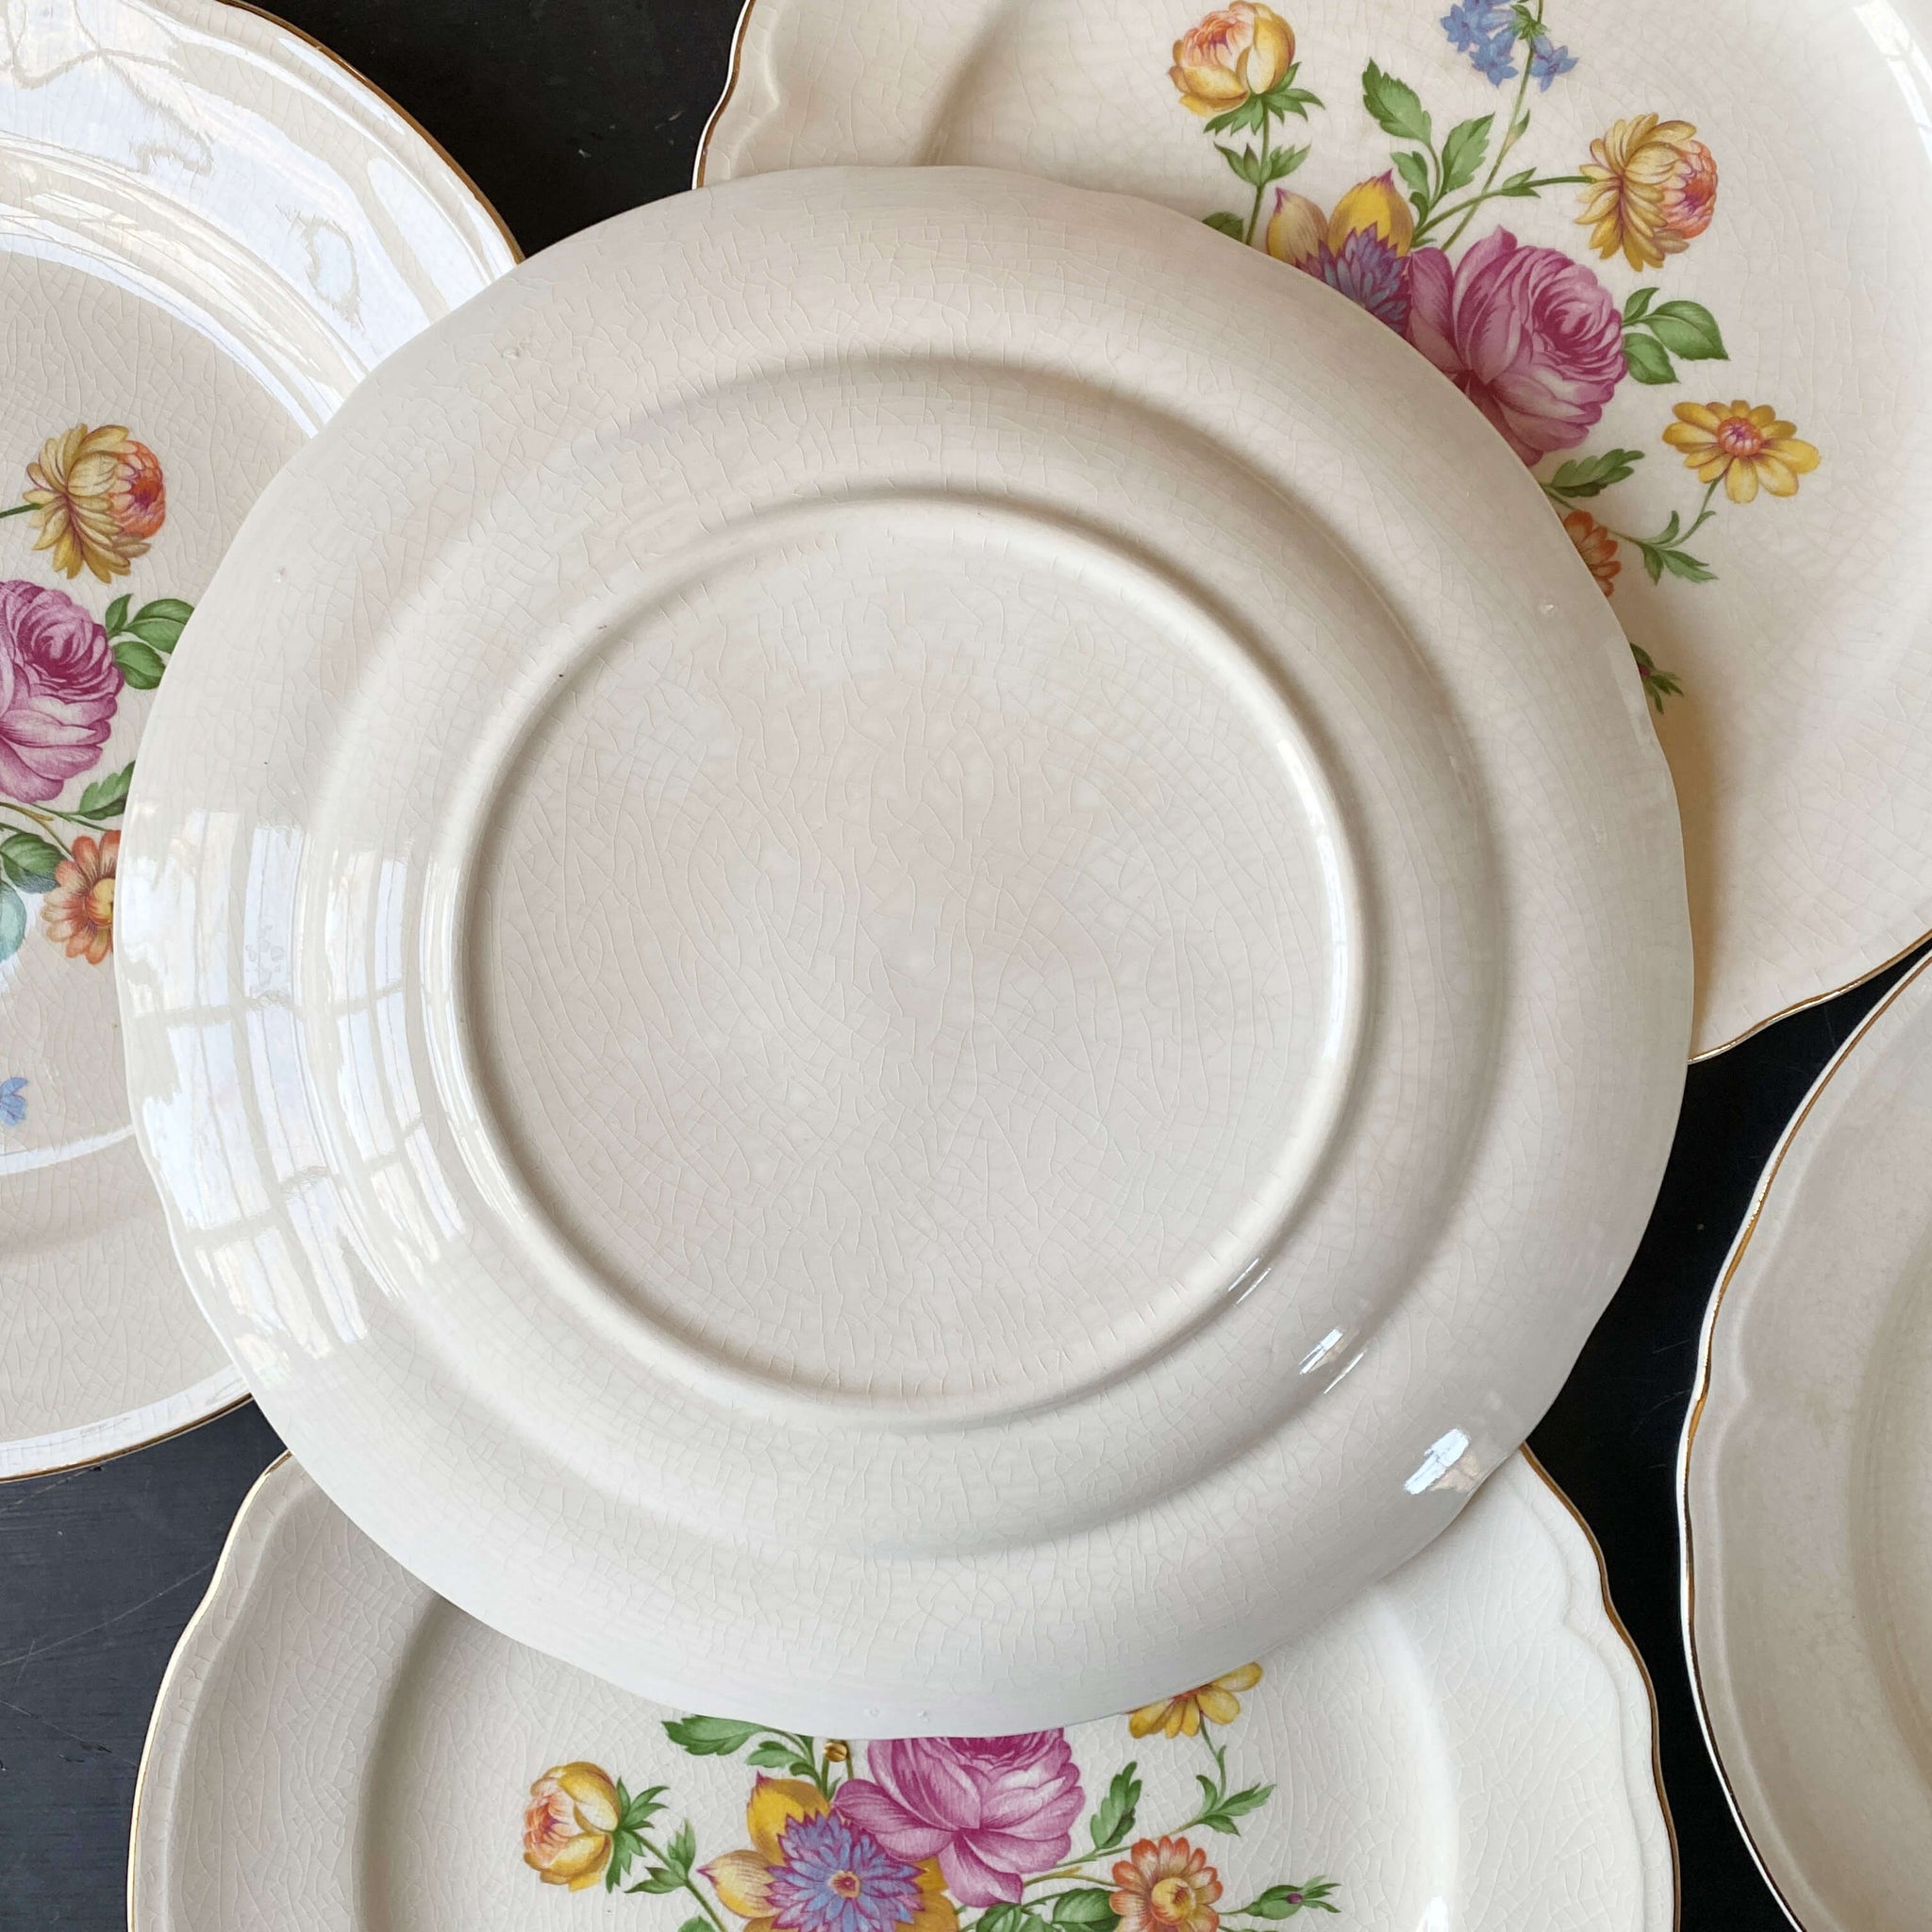 Vintage 1950s Multifloral Dinner Plates by Edwin Knowles - Set of Five